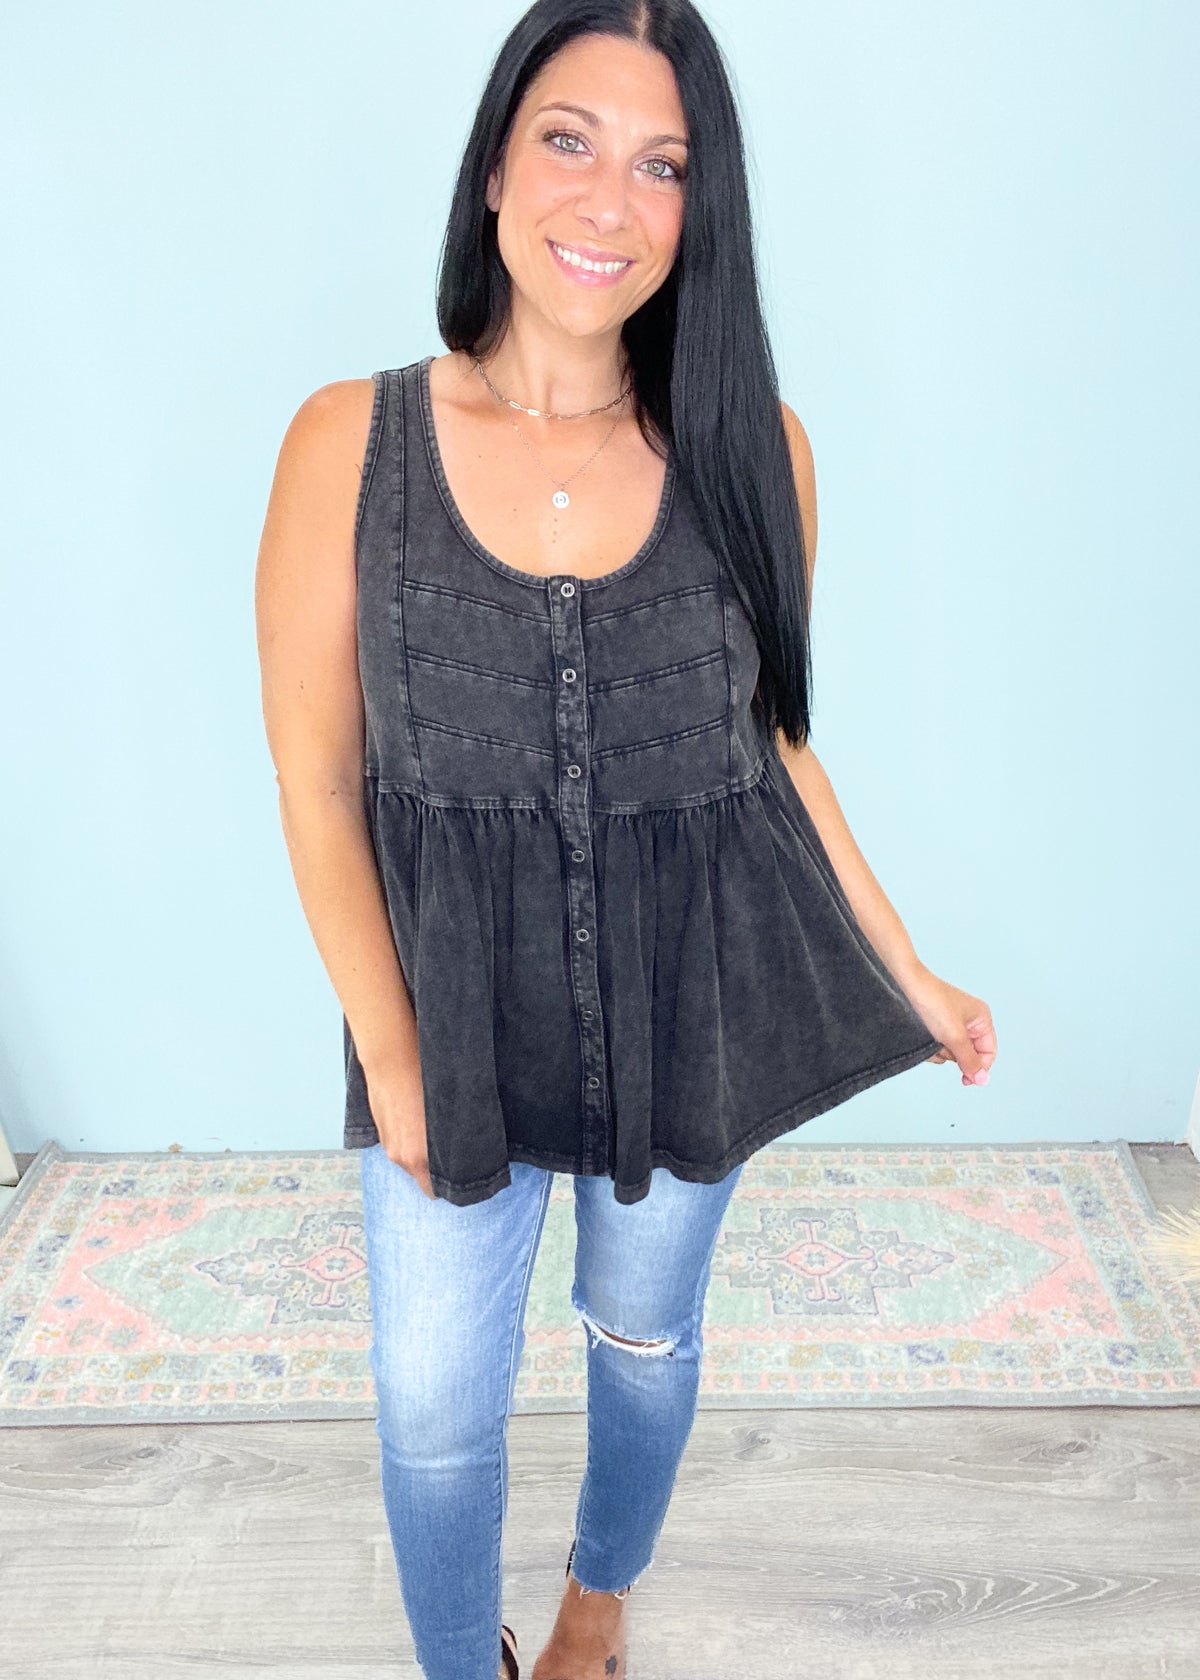 'Mood Swings' Vintage Washed Button Front Swing Tank with Stitching-This comfortable swing style top has all the moody vintage vibes! The fabric has a denim look but is super soft to the touch with lots of stretch. It can be dressed up or worn casually. Perfect for denim and leggings! -Cali Moon Boutique, Plainville Connecticut